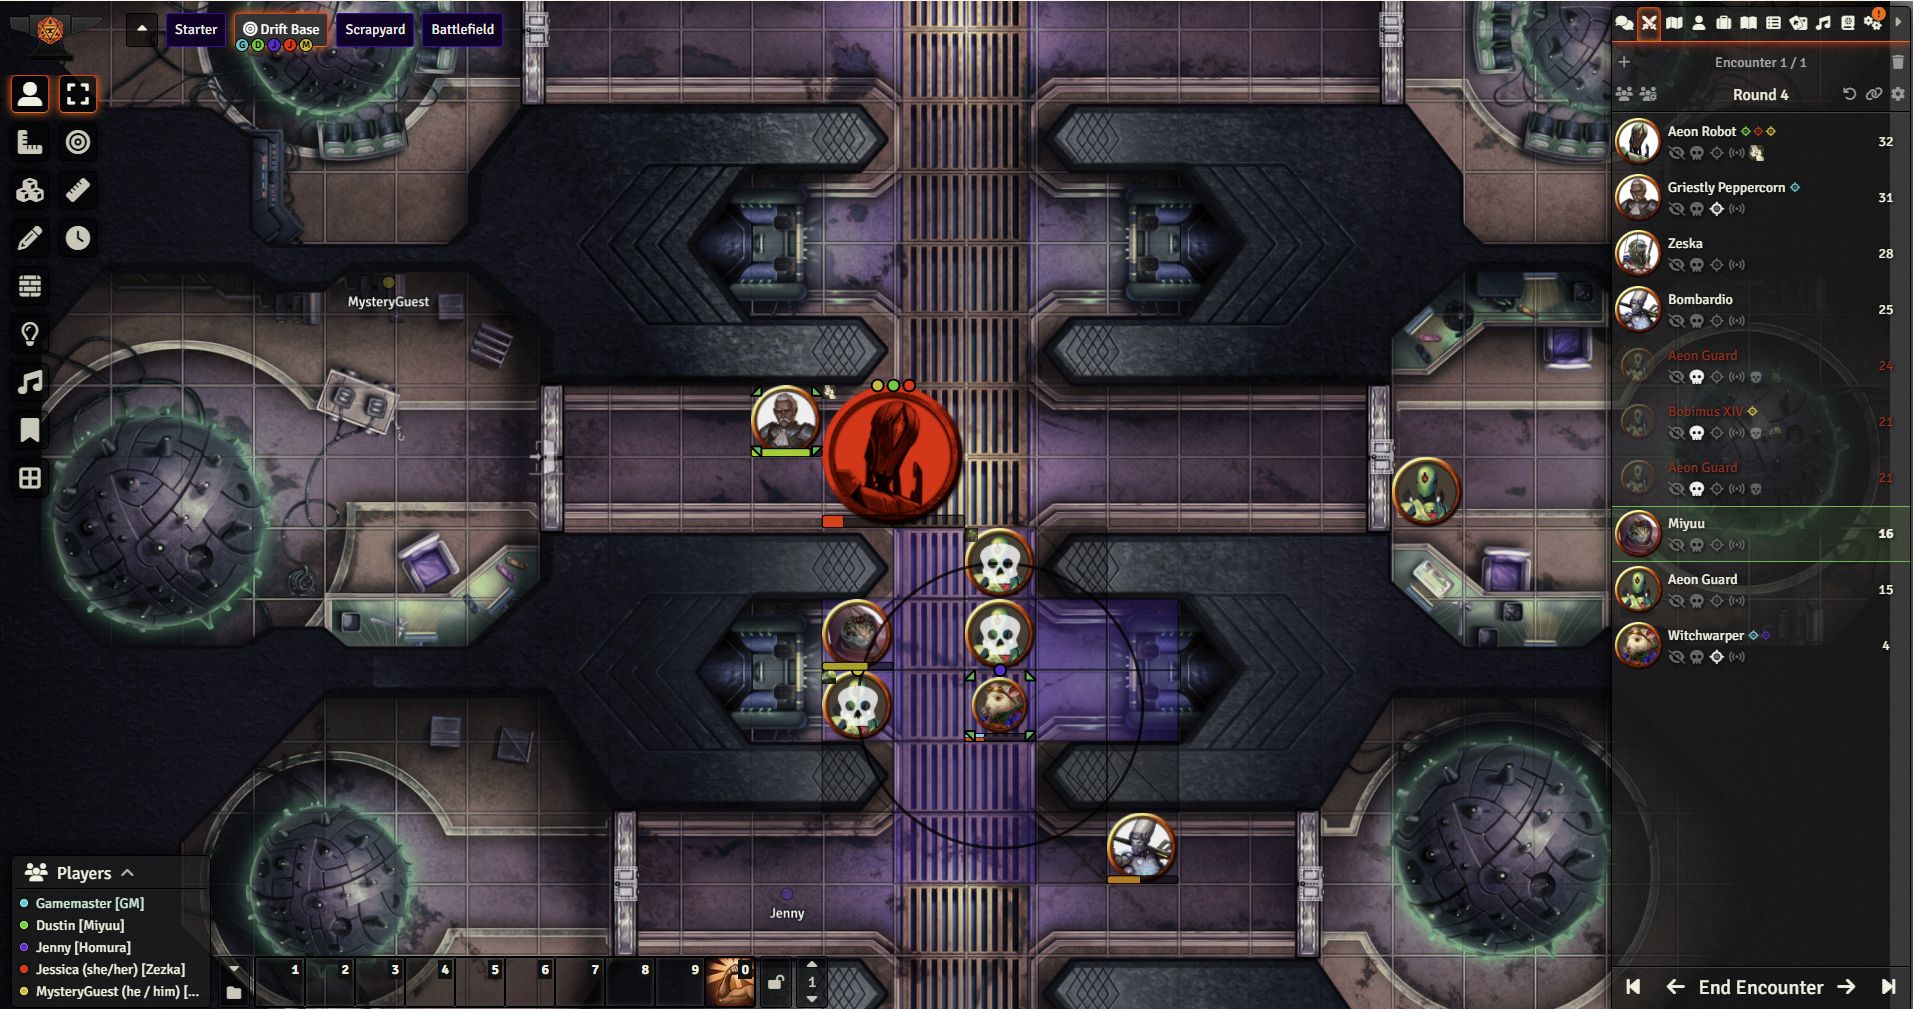 Top down view of virtual tabletop online map featuring an interior walkway with the game UI on the right side of the screen